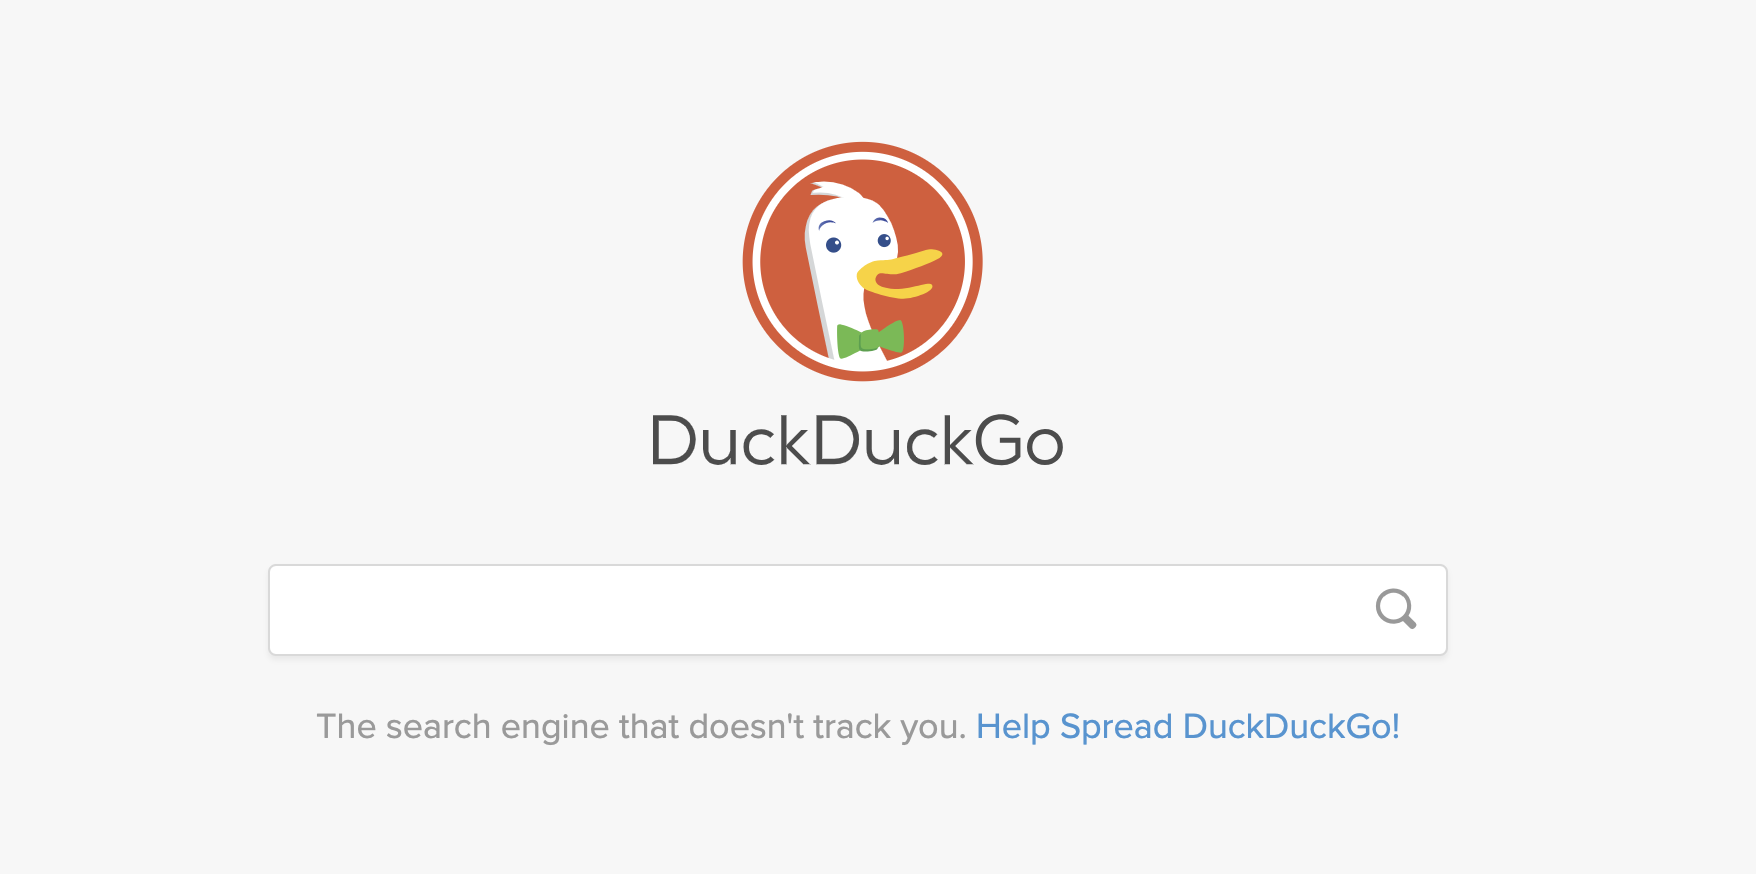 Is DuckDuckGo owned by Google?